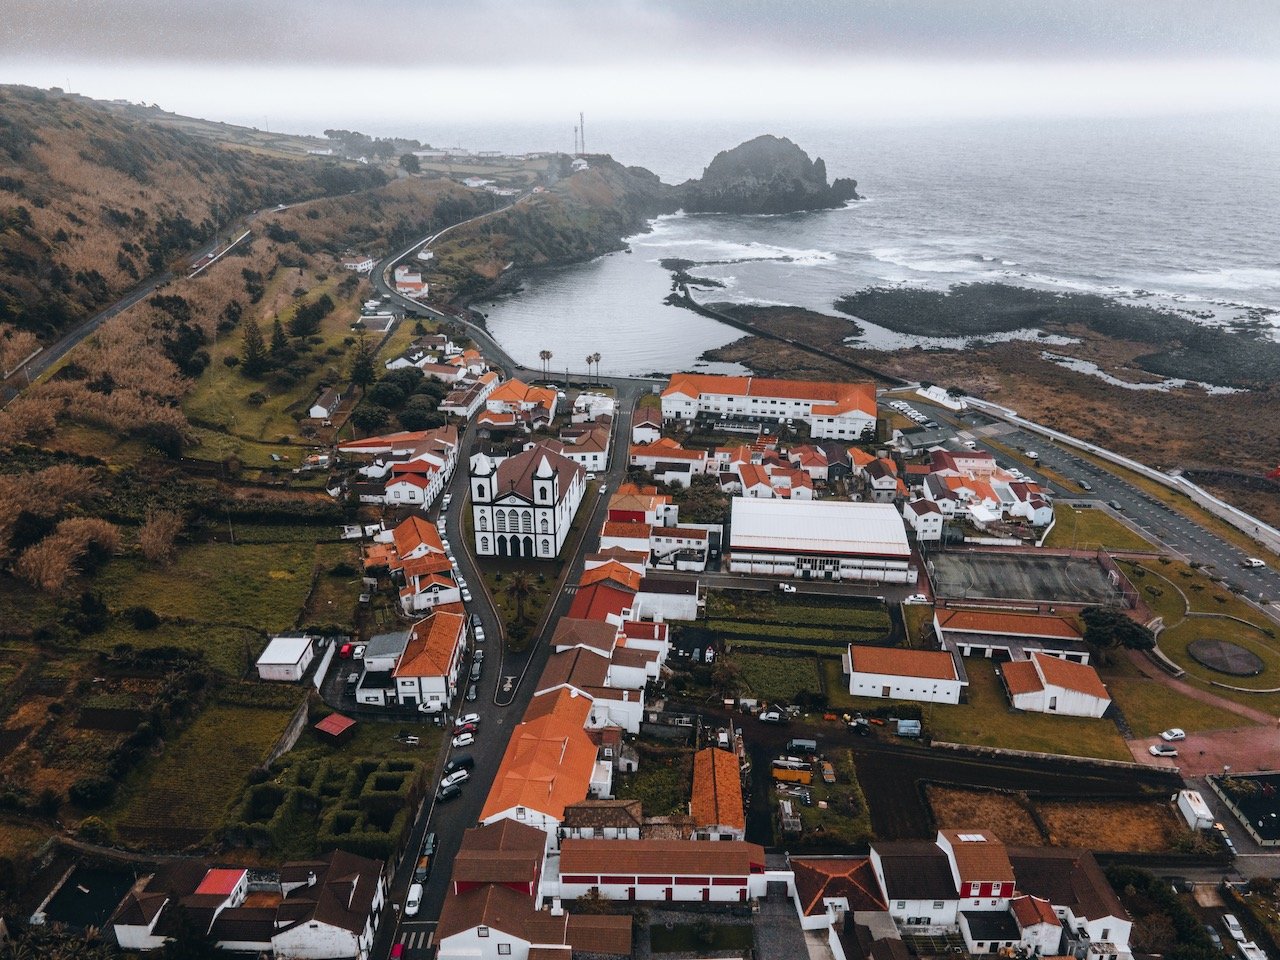   Lajes, Pico, the Azores (ISO 200, 4.5 mm,  f /2.8, 1/30 s)  